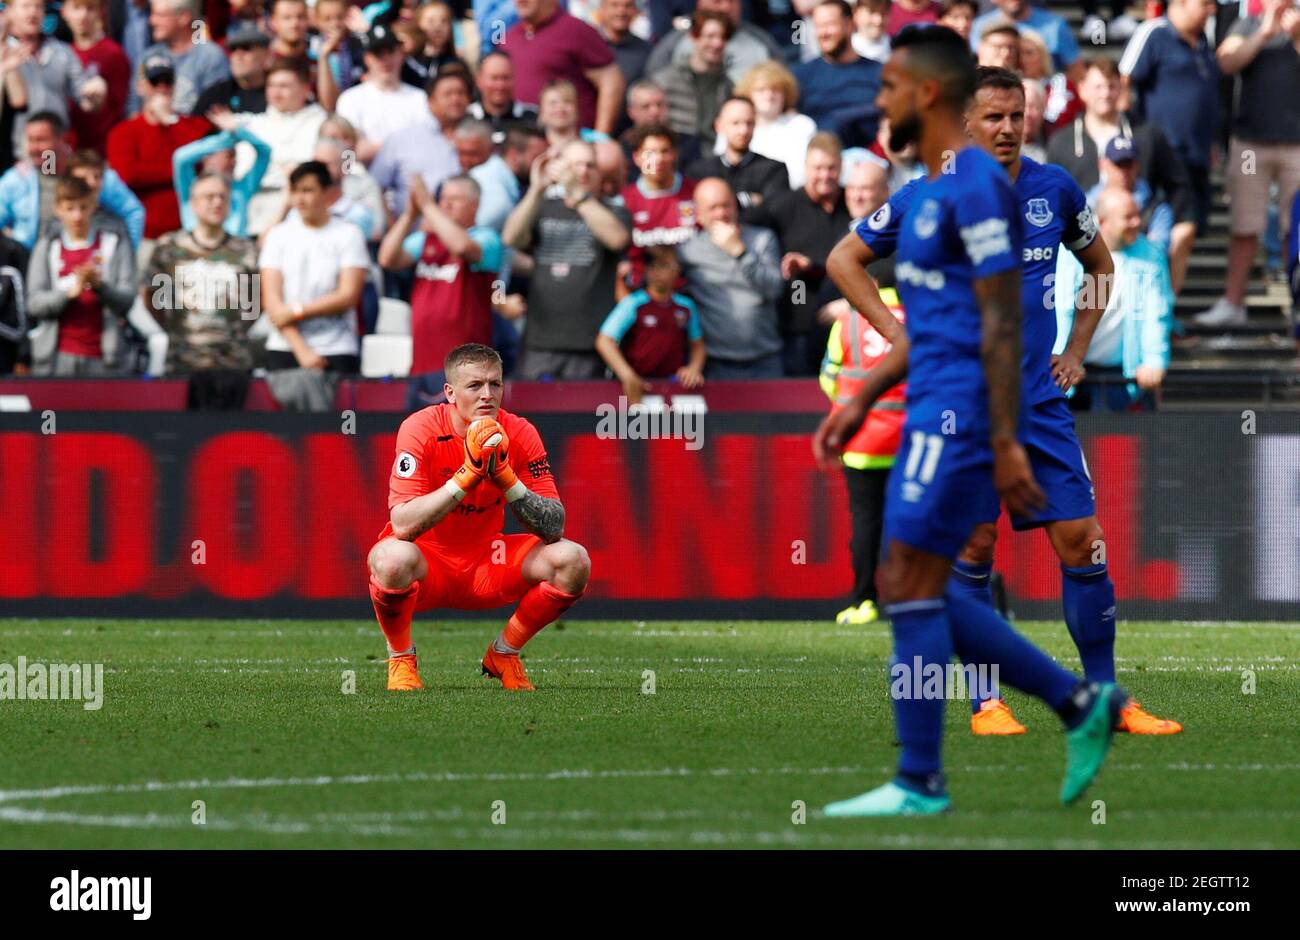 Soccer Football - Premier League - West Ham United vs Everton - London Stadium, London, Britain - May 13, 2018   Everton's Jordan Pickford reacts after conceding their third goal scored by West Ham United's Manuel Lanzini    REUTERS/Eddie Keogh    EDITORIAL USE ONLY. No use with unauthorized audio, video, data, fixture lists, club/league logos or 'live' services. Online in-match use limited to 75 images, no video emulation. No use in betting, games or single club/league/player publications.  Please contact your account representative for further details. Stock Photo